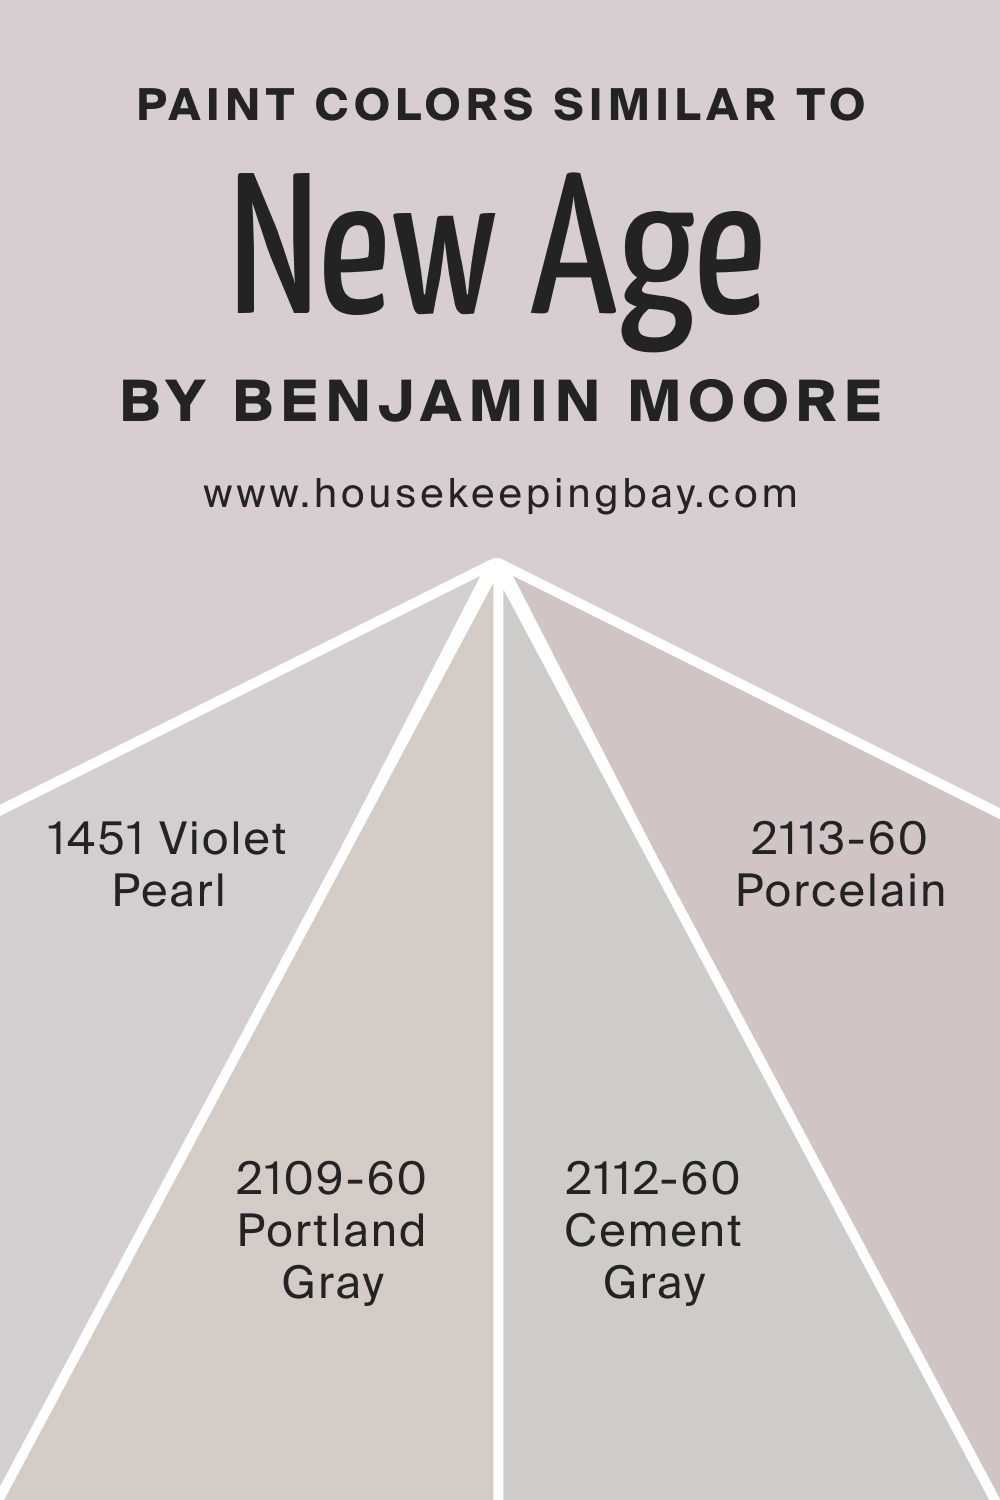 Paint Colors Similar to New Age 1444 by Benjamin Moore